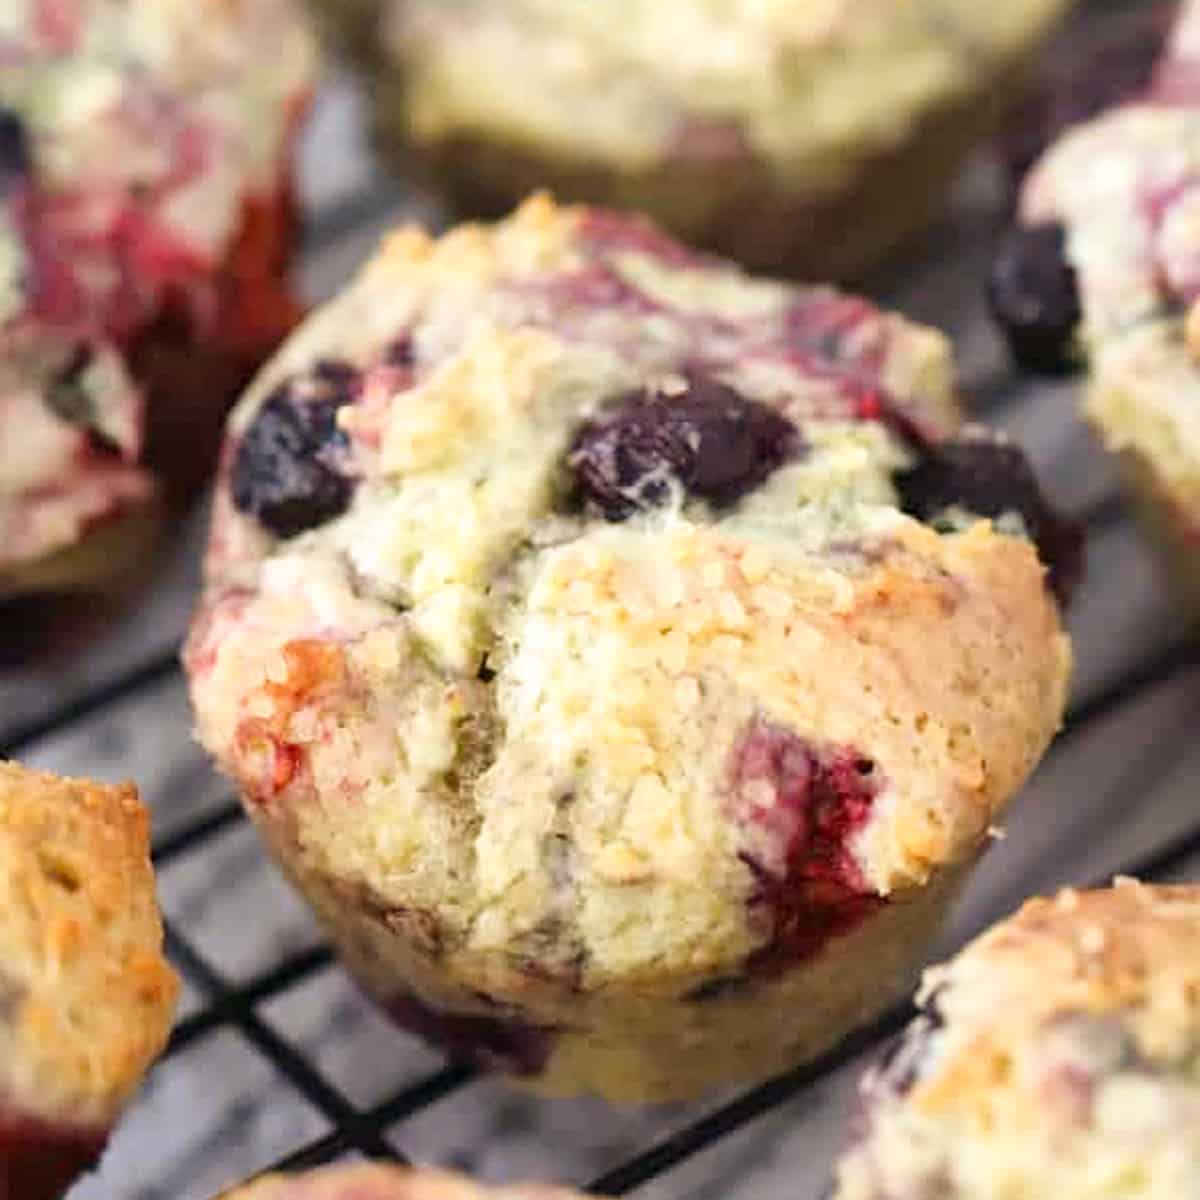 Best triple berry or Blueberry muffin recipe from scratch